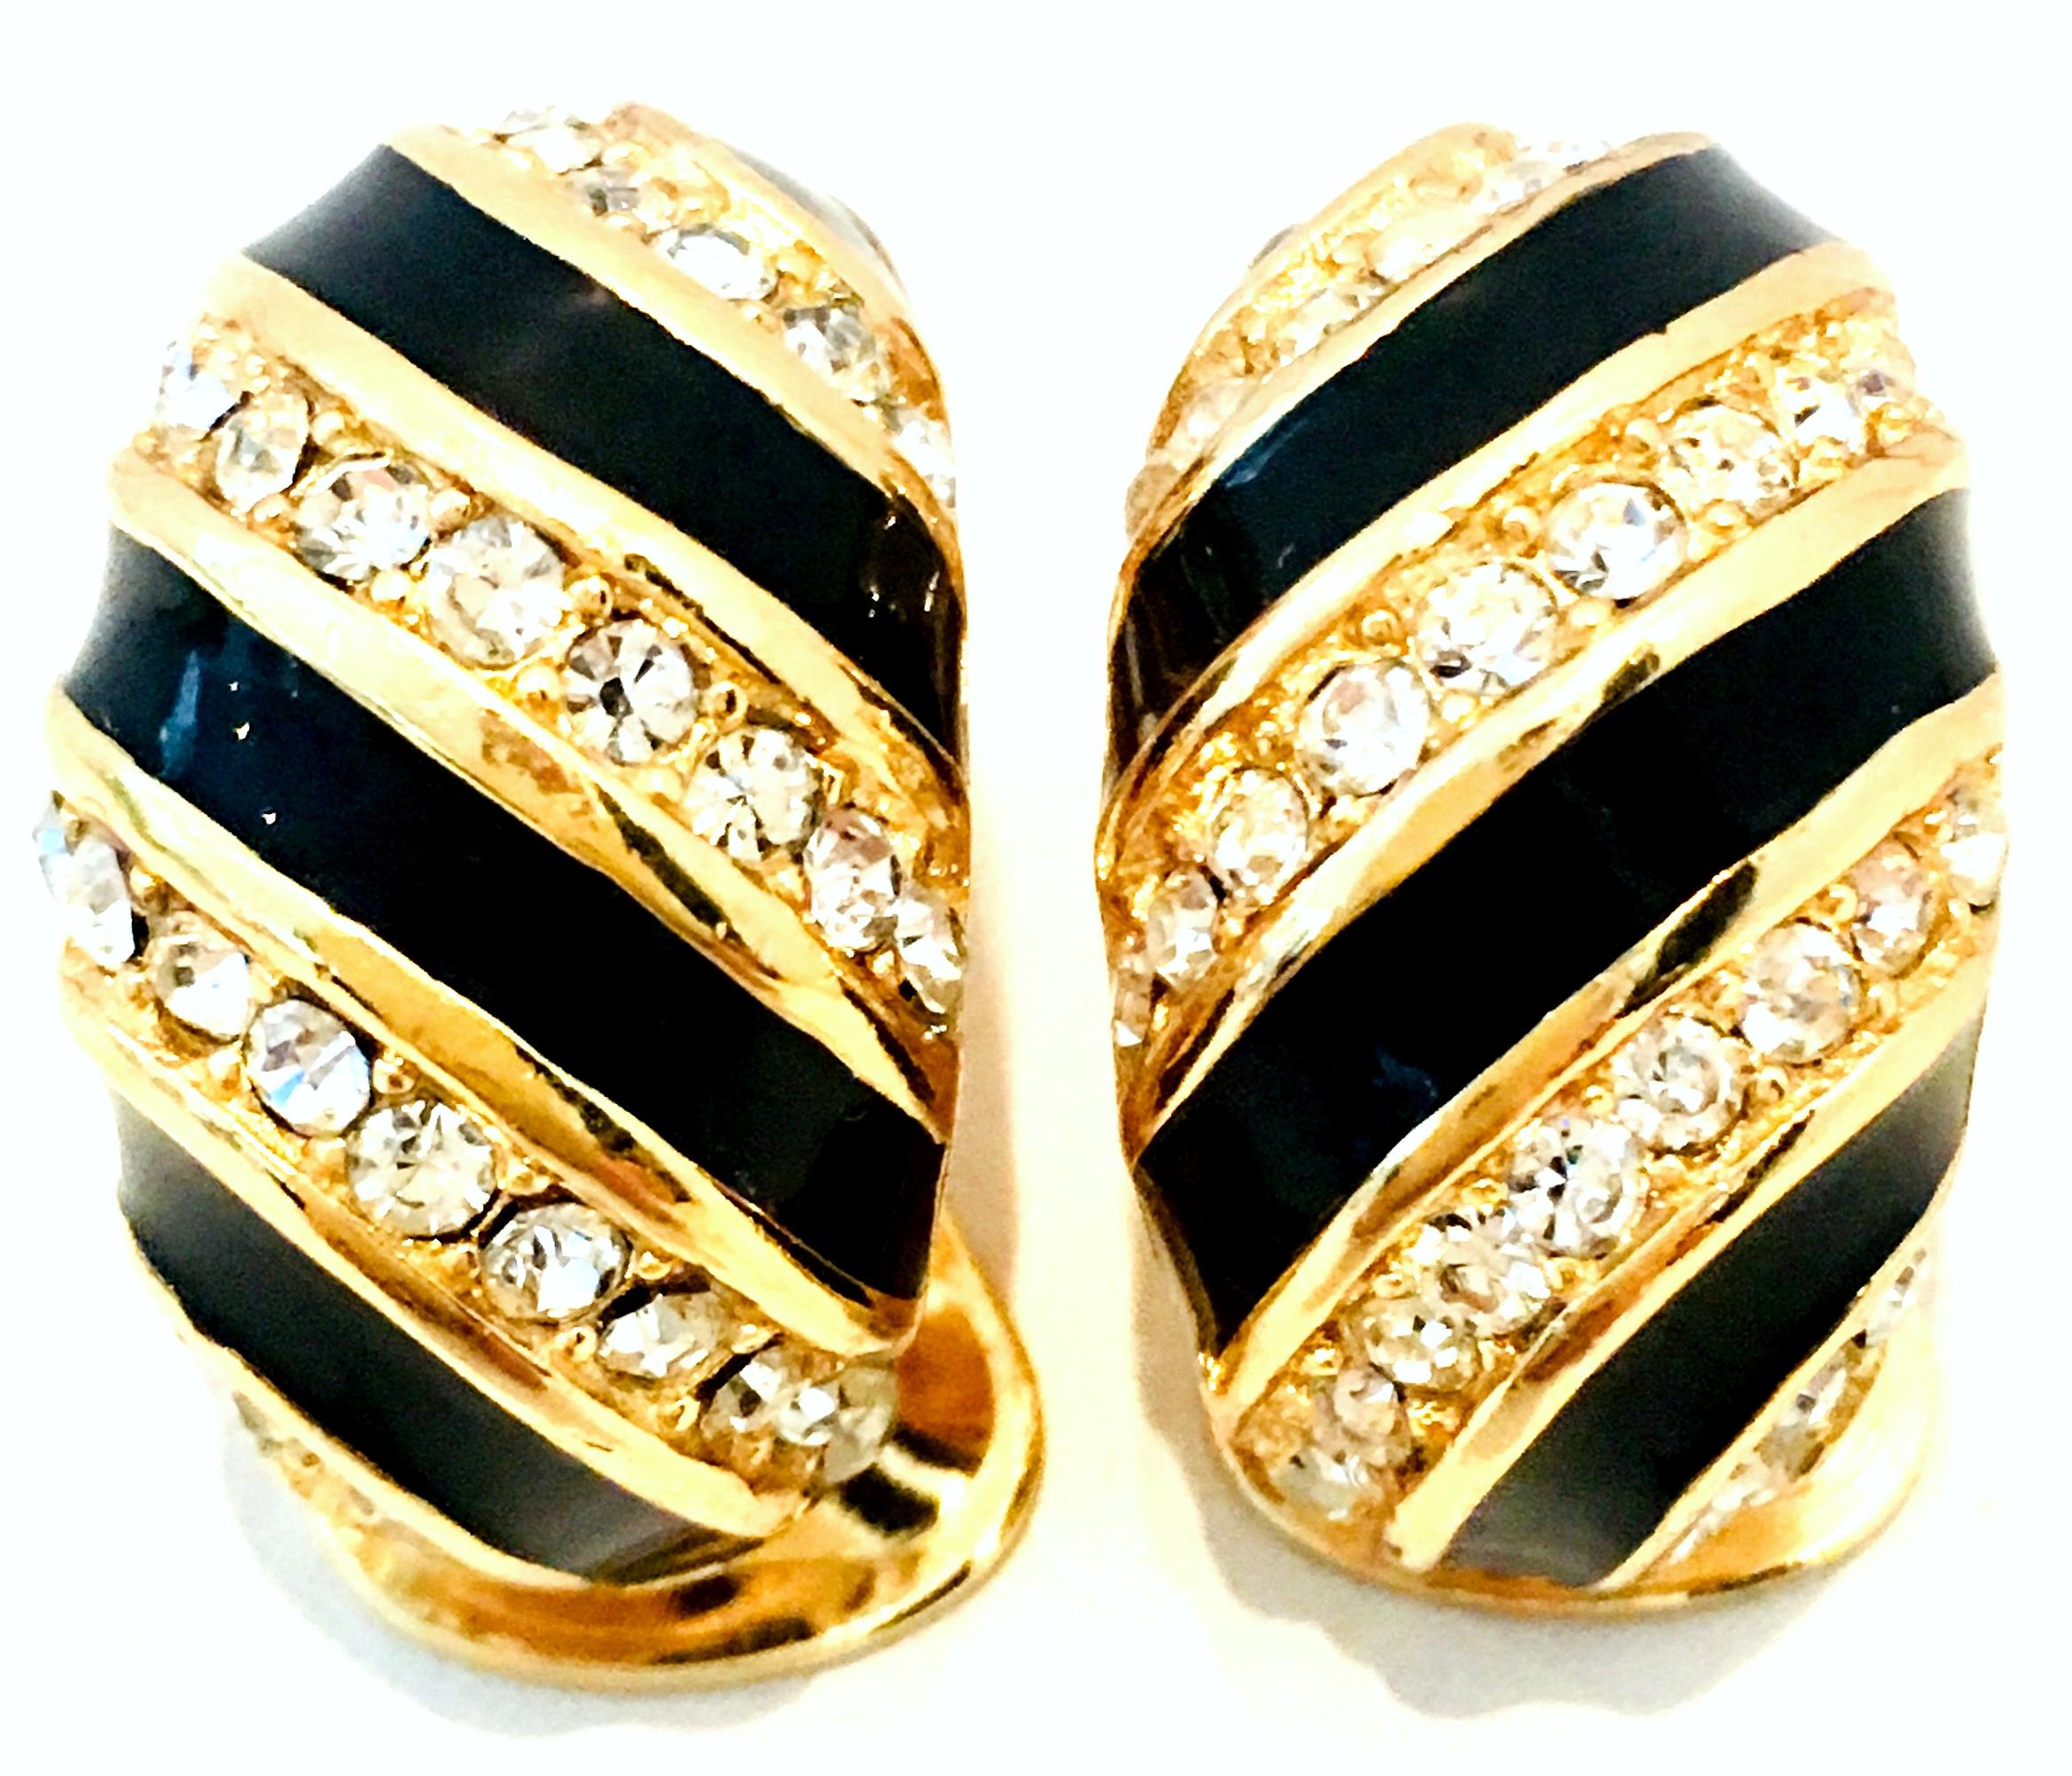 20th Century Pair Of Gold, Enamel & Austrian Crystal Earrings By, Christian Dior. These classic and timeless clip style crescent shaped earrings feature gold plate with black enamel and pave set brilliant and colorless Austrian crystals. Signed on